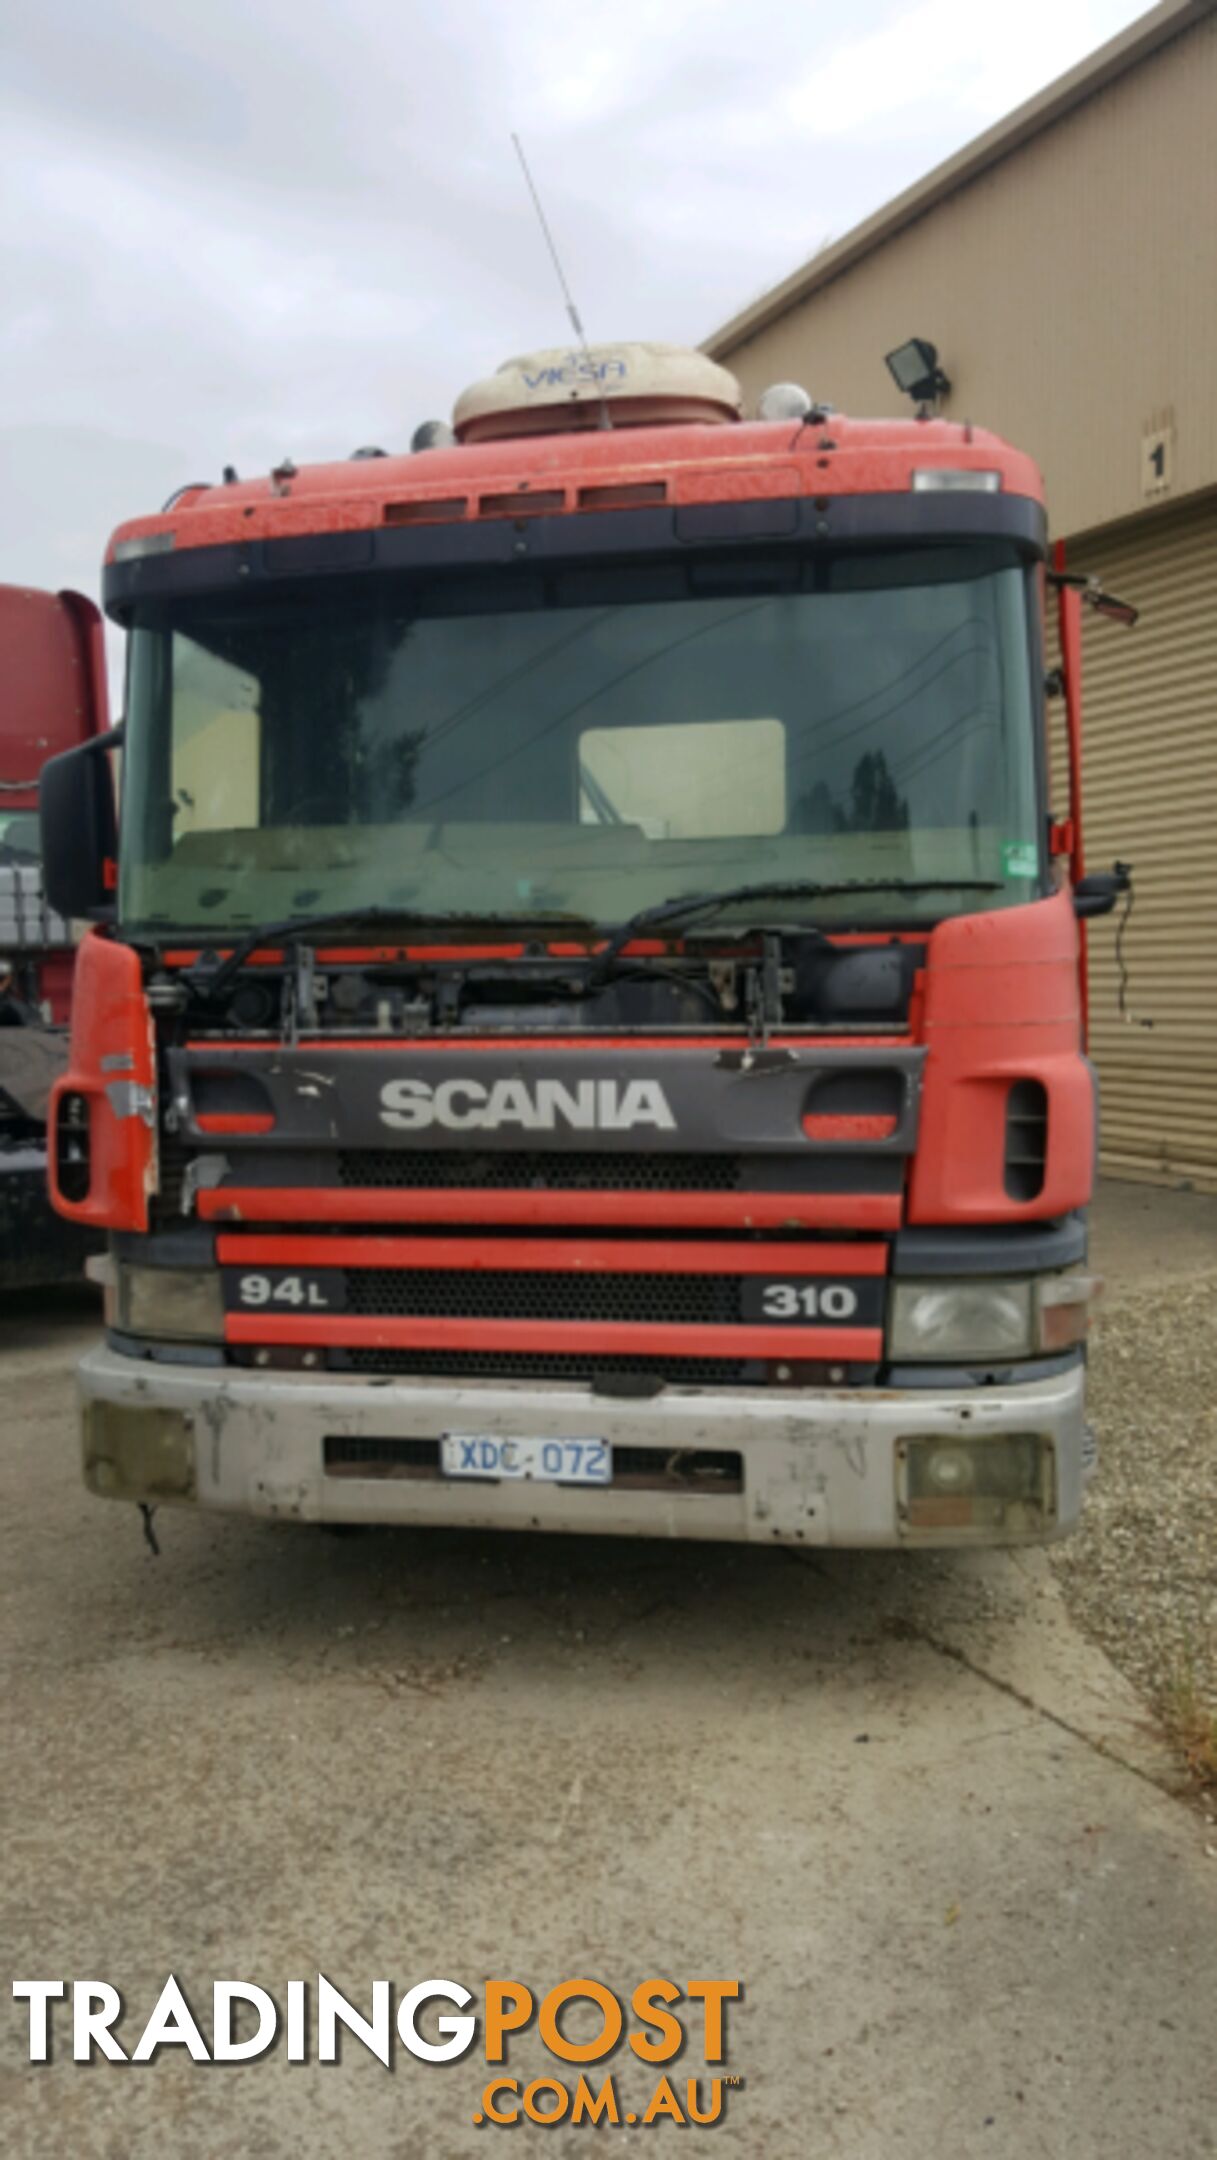 1999 Scania 94L 310 Wrecking Now